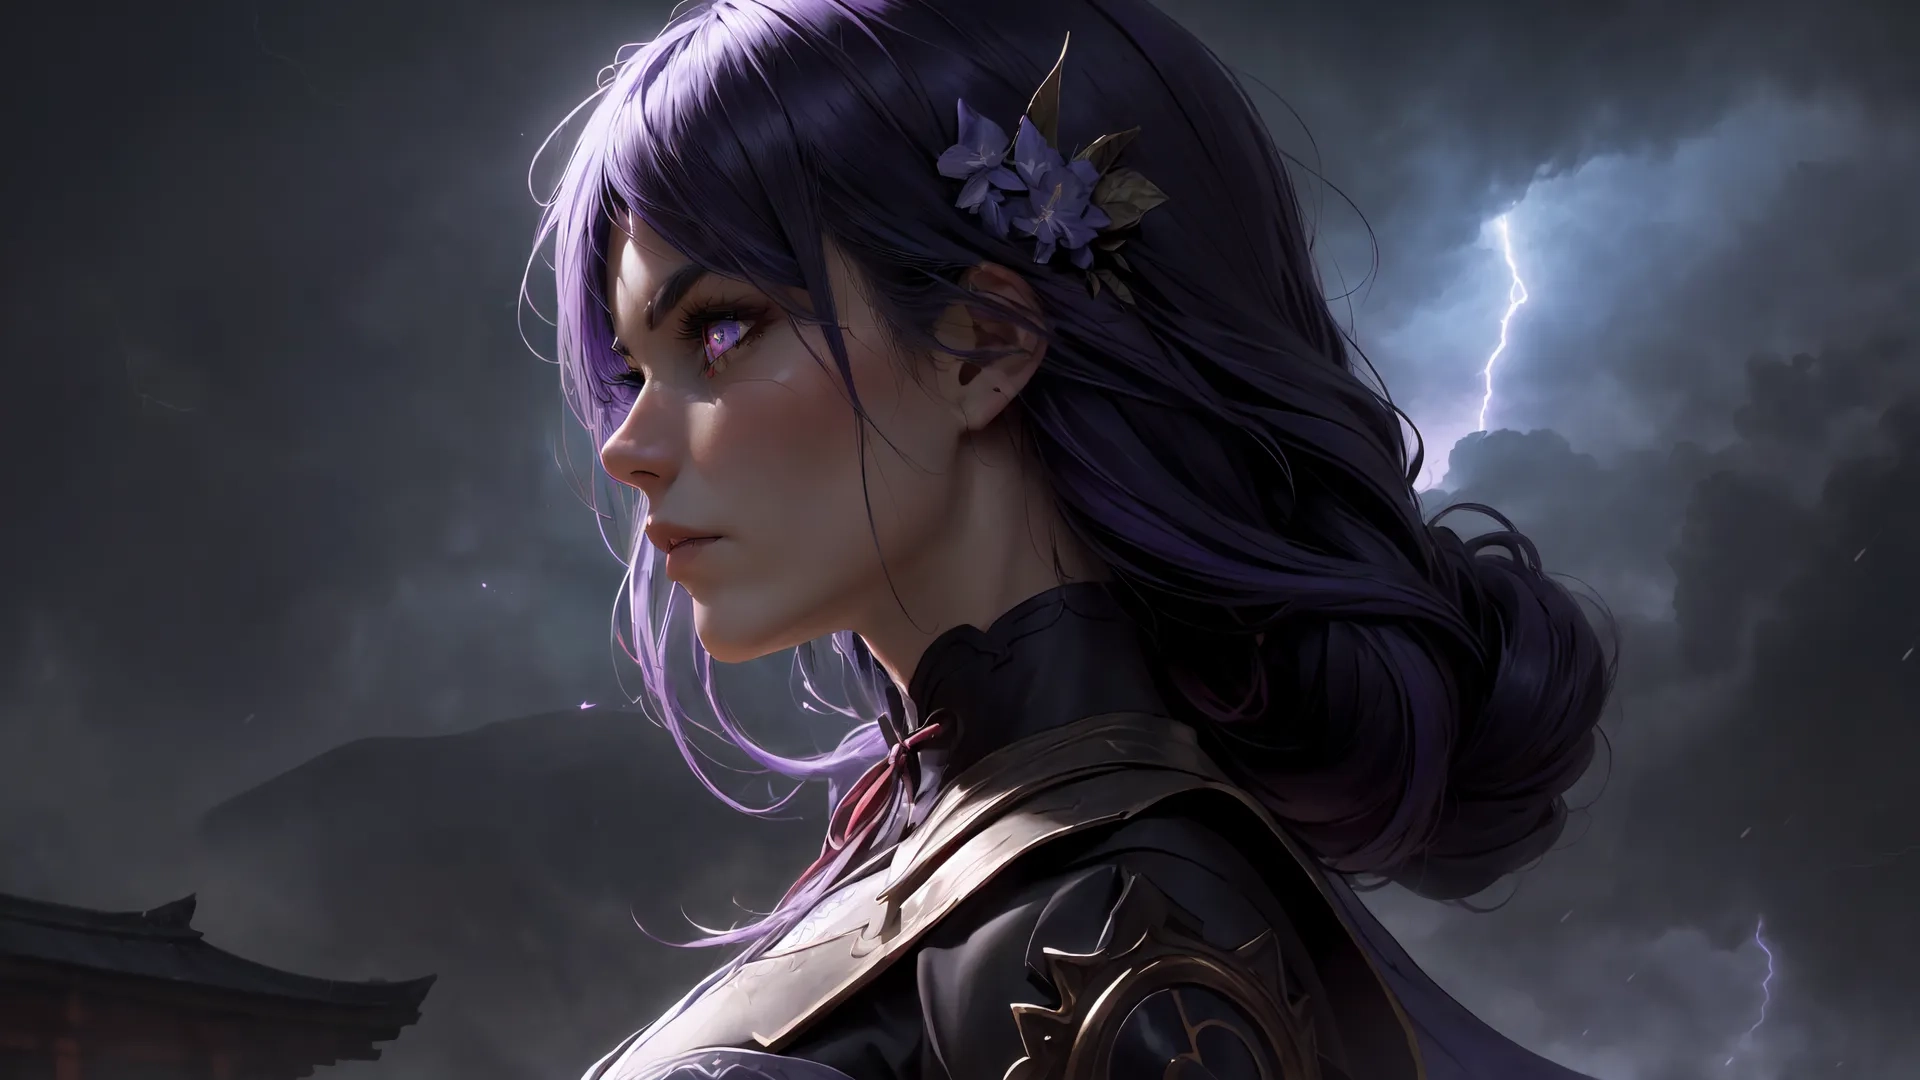 the young woman is holding her weapon on a stormy background, and has a purple hair in front of her face with lightning clouds above and mountains in the sky behind her
